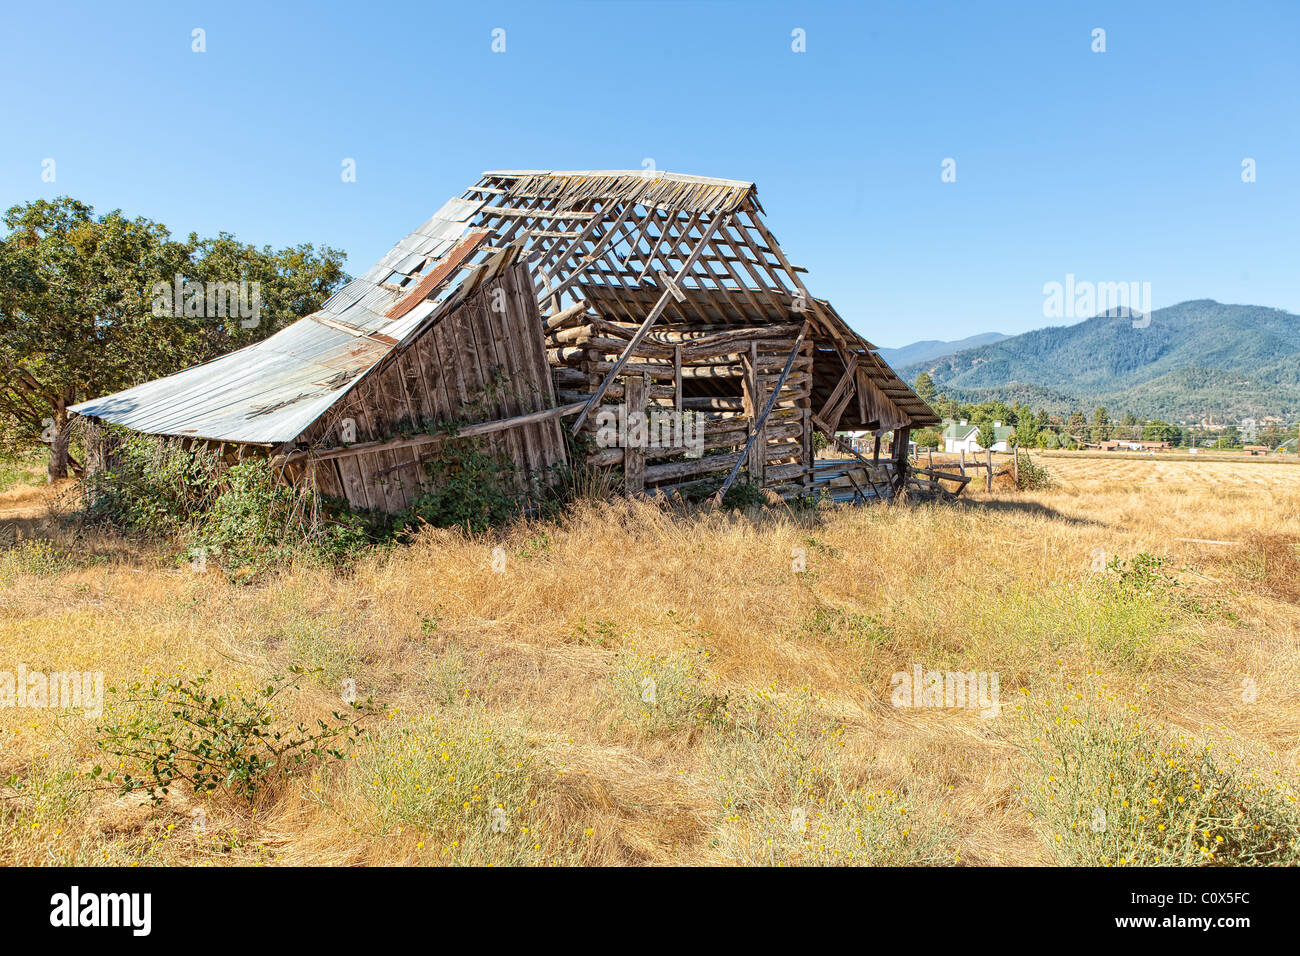 Old dilapidated barn falling apart in field of farm/ranch in Applegate Valley, Oregon. Stock Photo